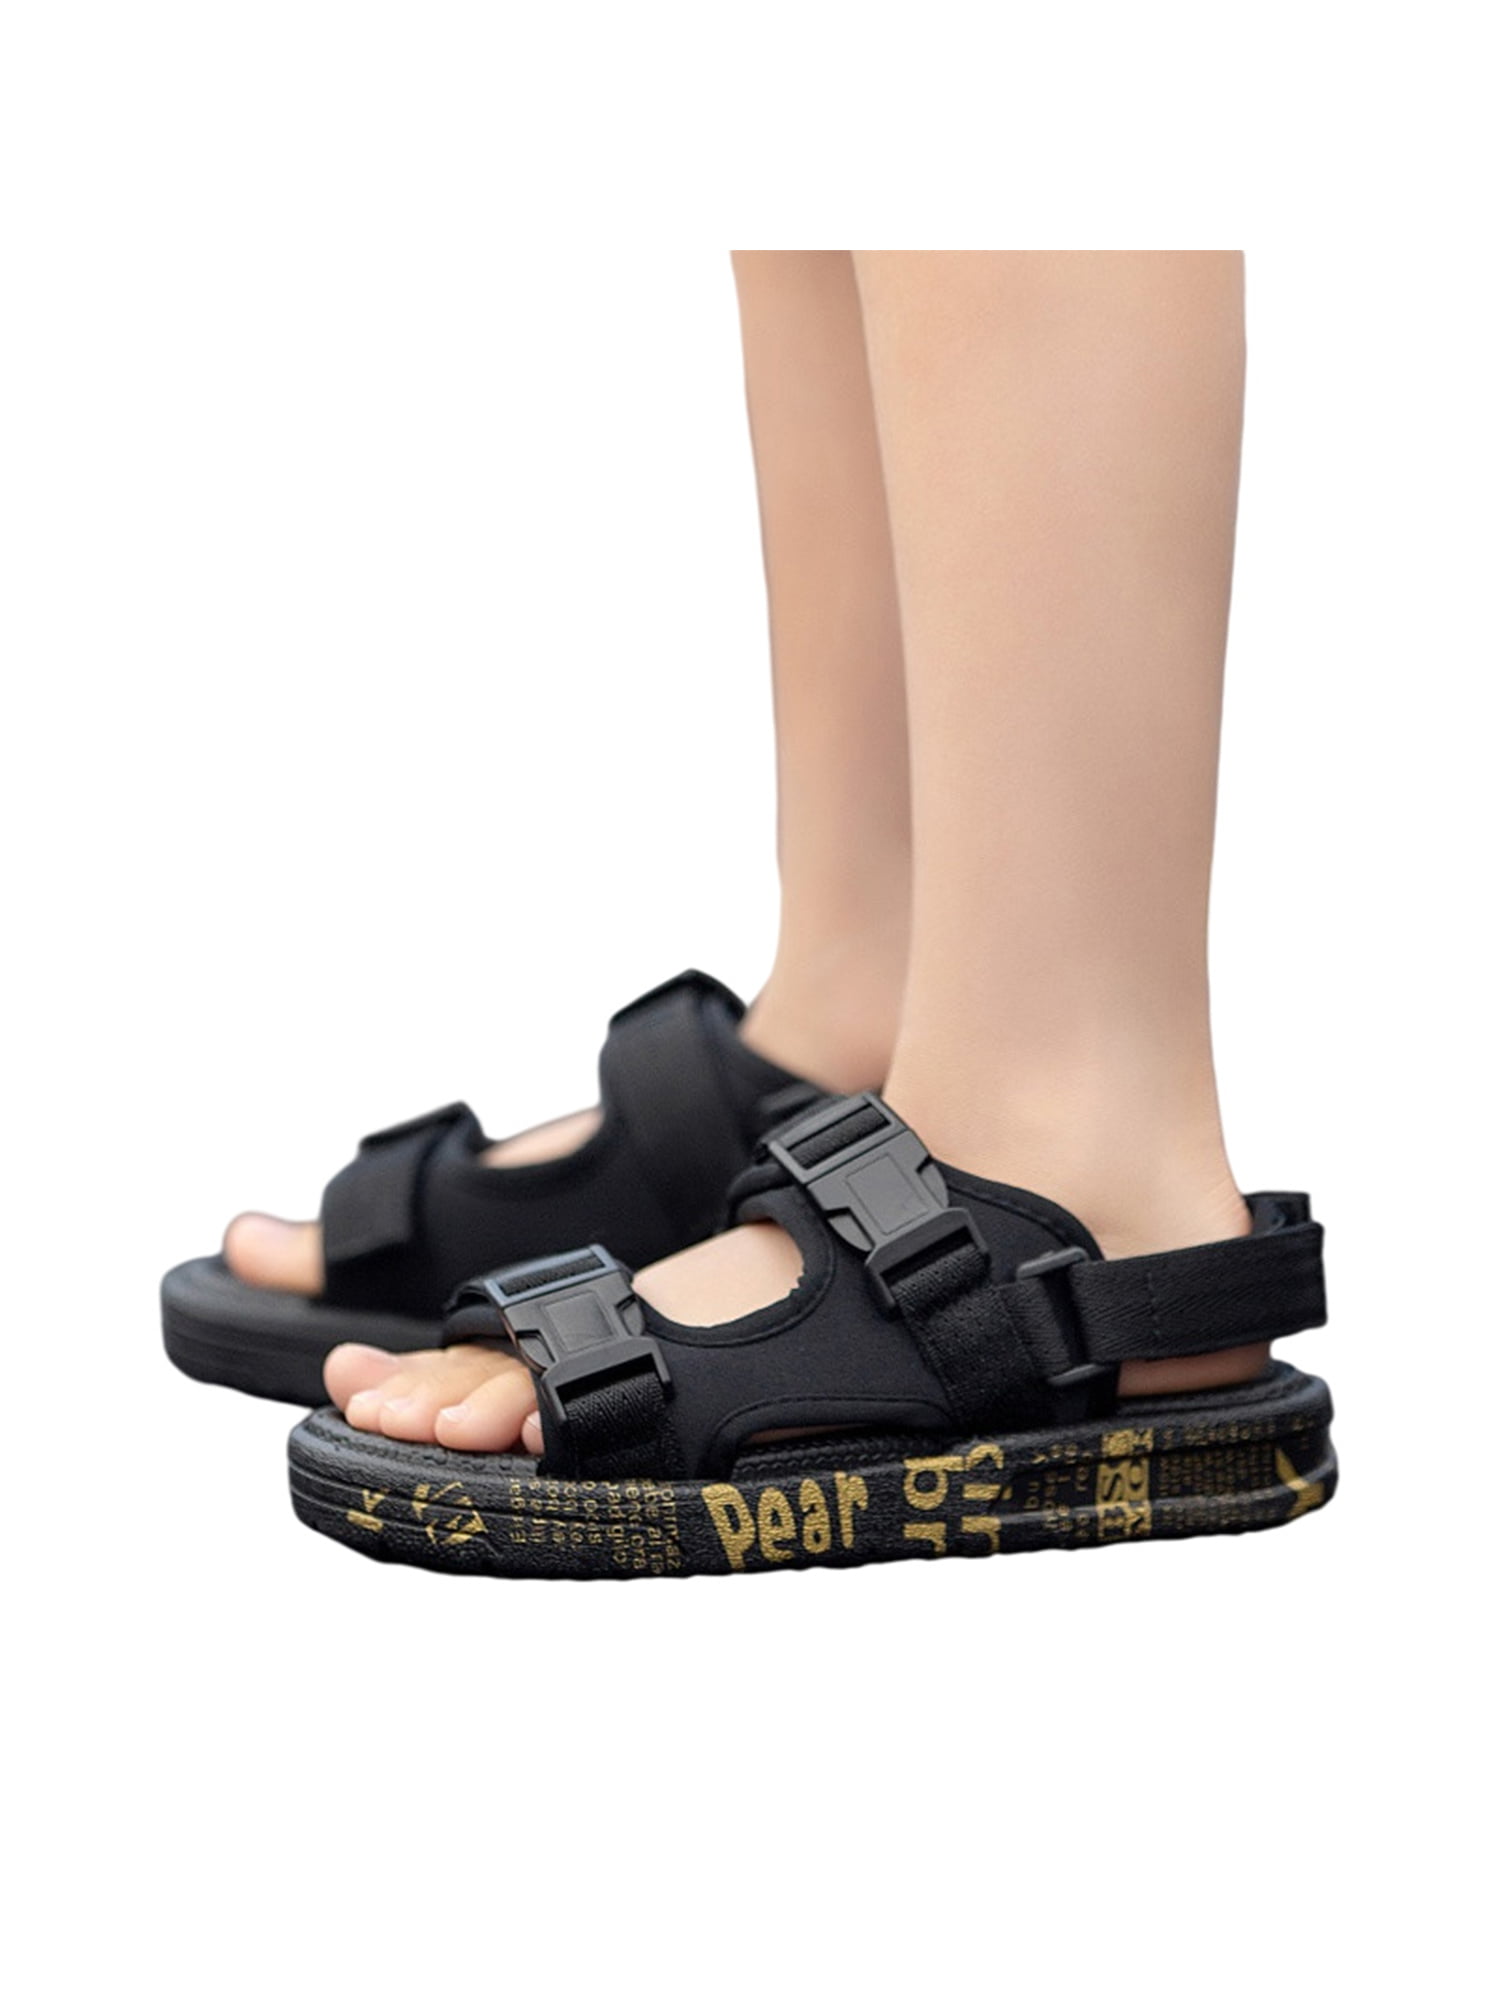 Details about   N0R035 SPOT ON BOYS OPEN TOE STRAPPY BUCKLE FASTENING BEACH SUMMER SANDALS SIZES 